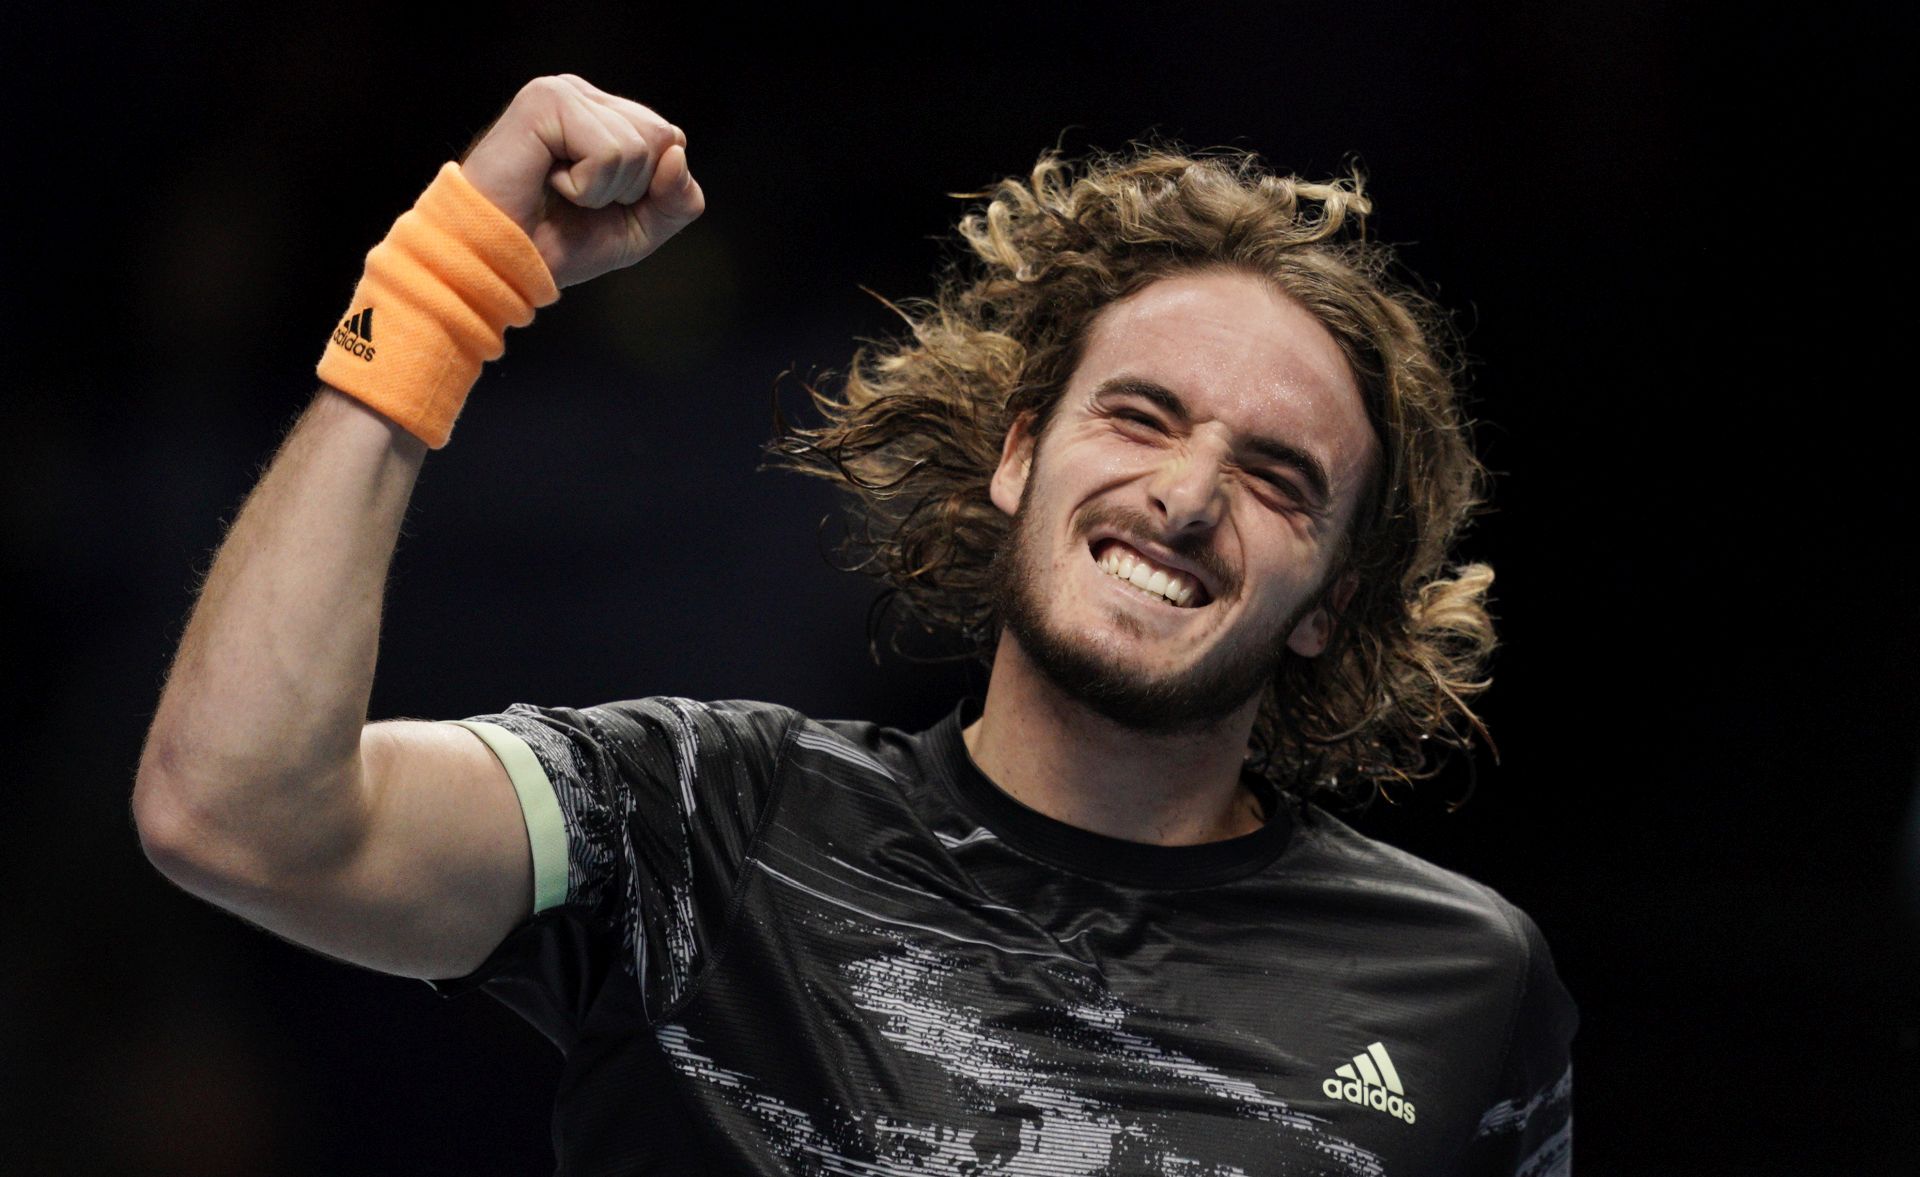 epa07988923 Stefanos Tsitsipas of Greece reacts after winning his round robin match against Daniil Medvedev of Russia at the ATP World Tour Finals tennis tournament in London, Britain, 11 November 2019.  EPA/WILL OLIVER